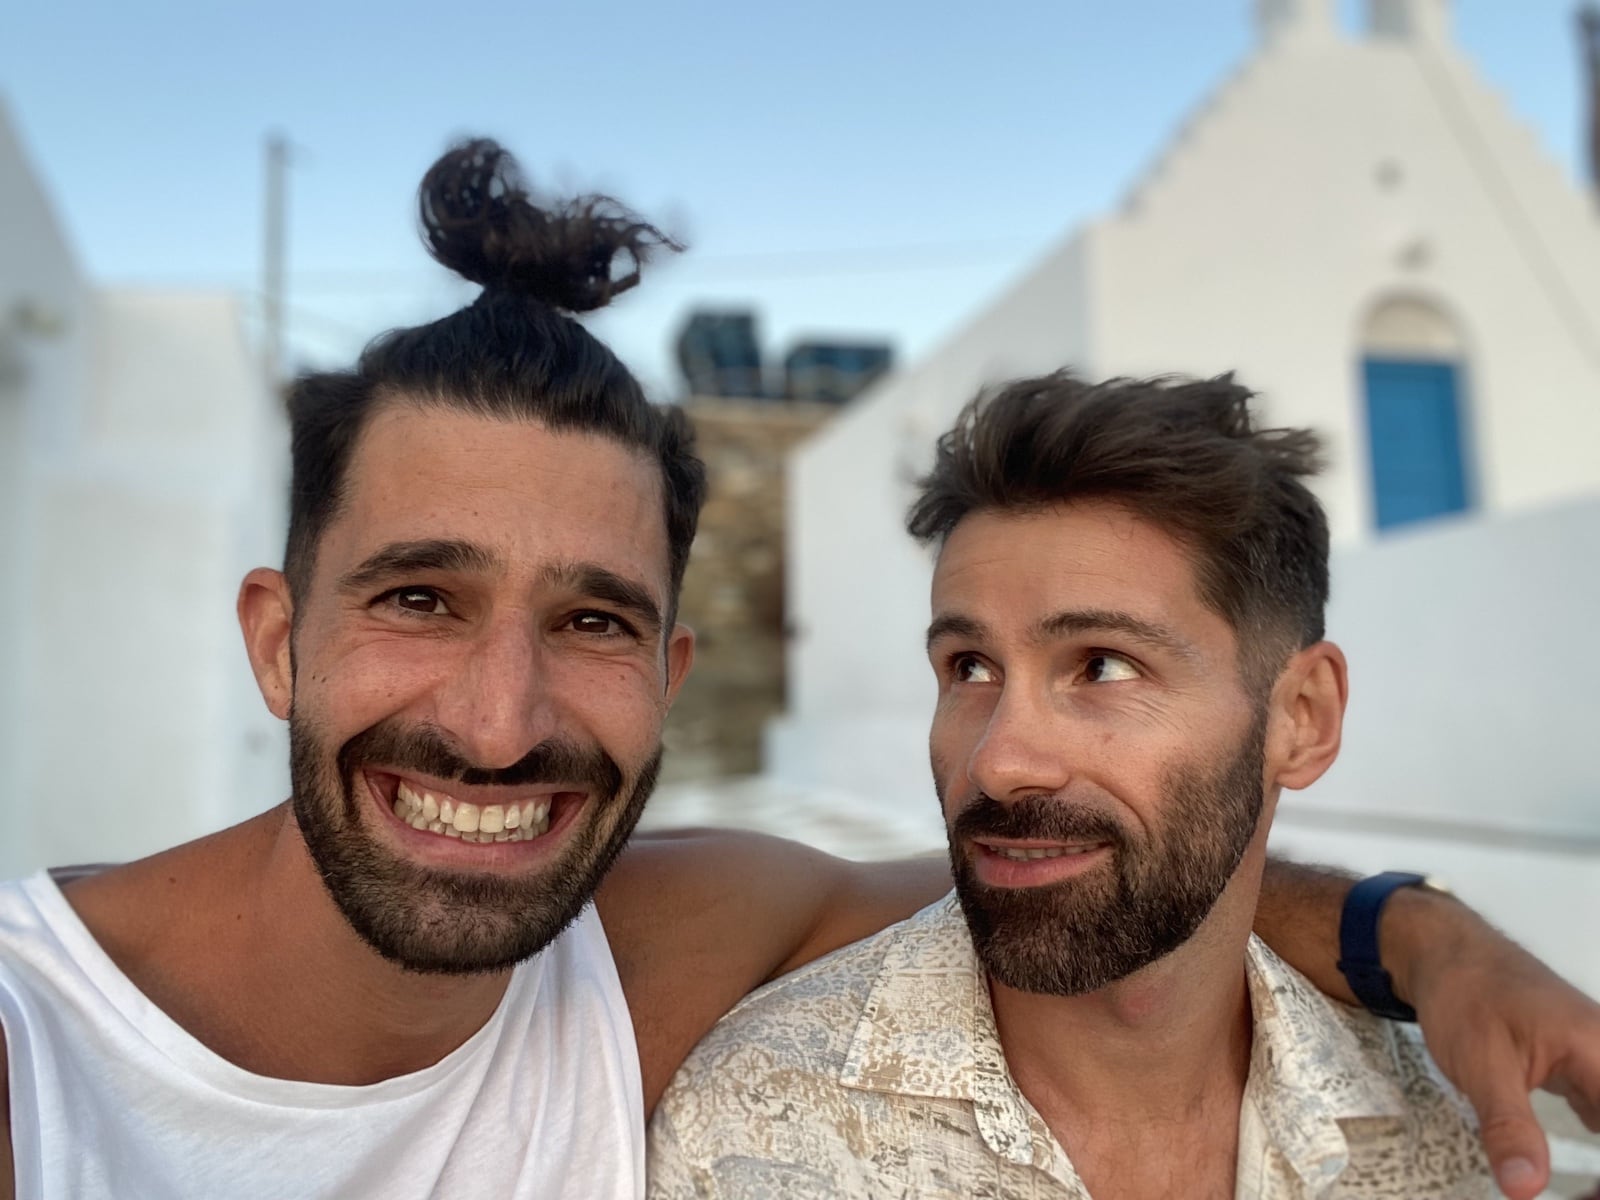 Stefan from Nomadic Boys wearing a beautiful man bun and Seby not being impressed.